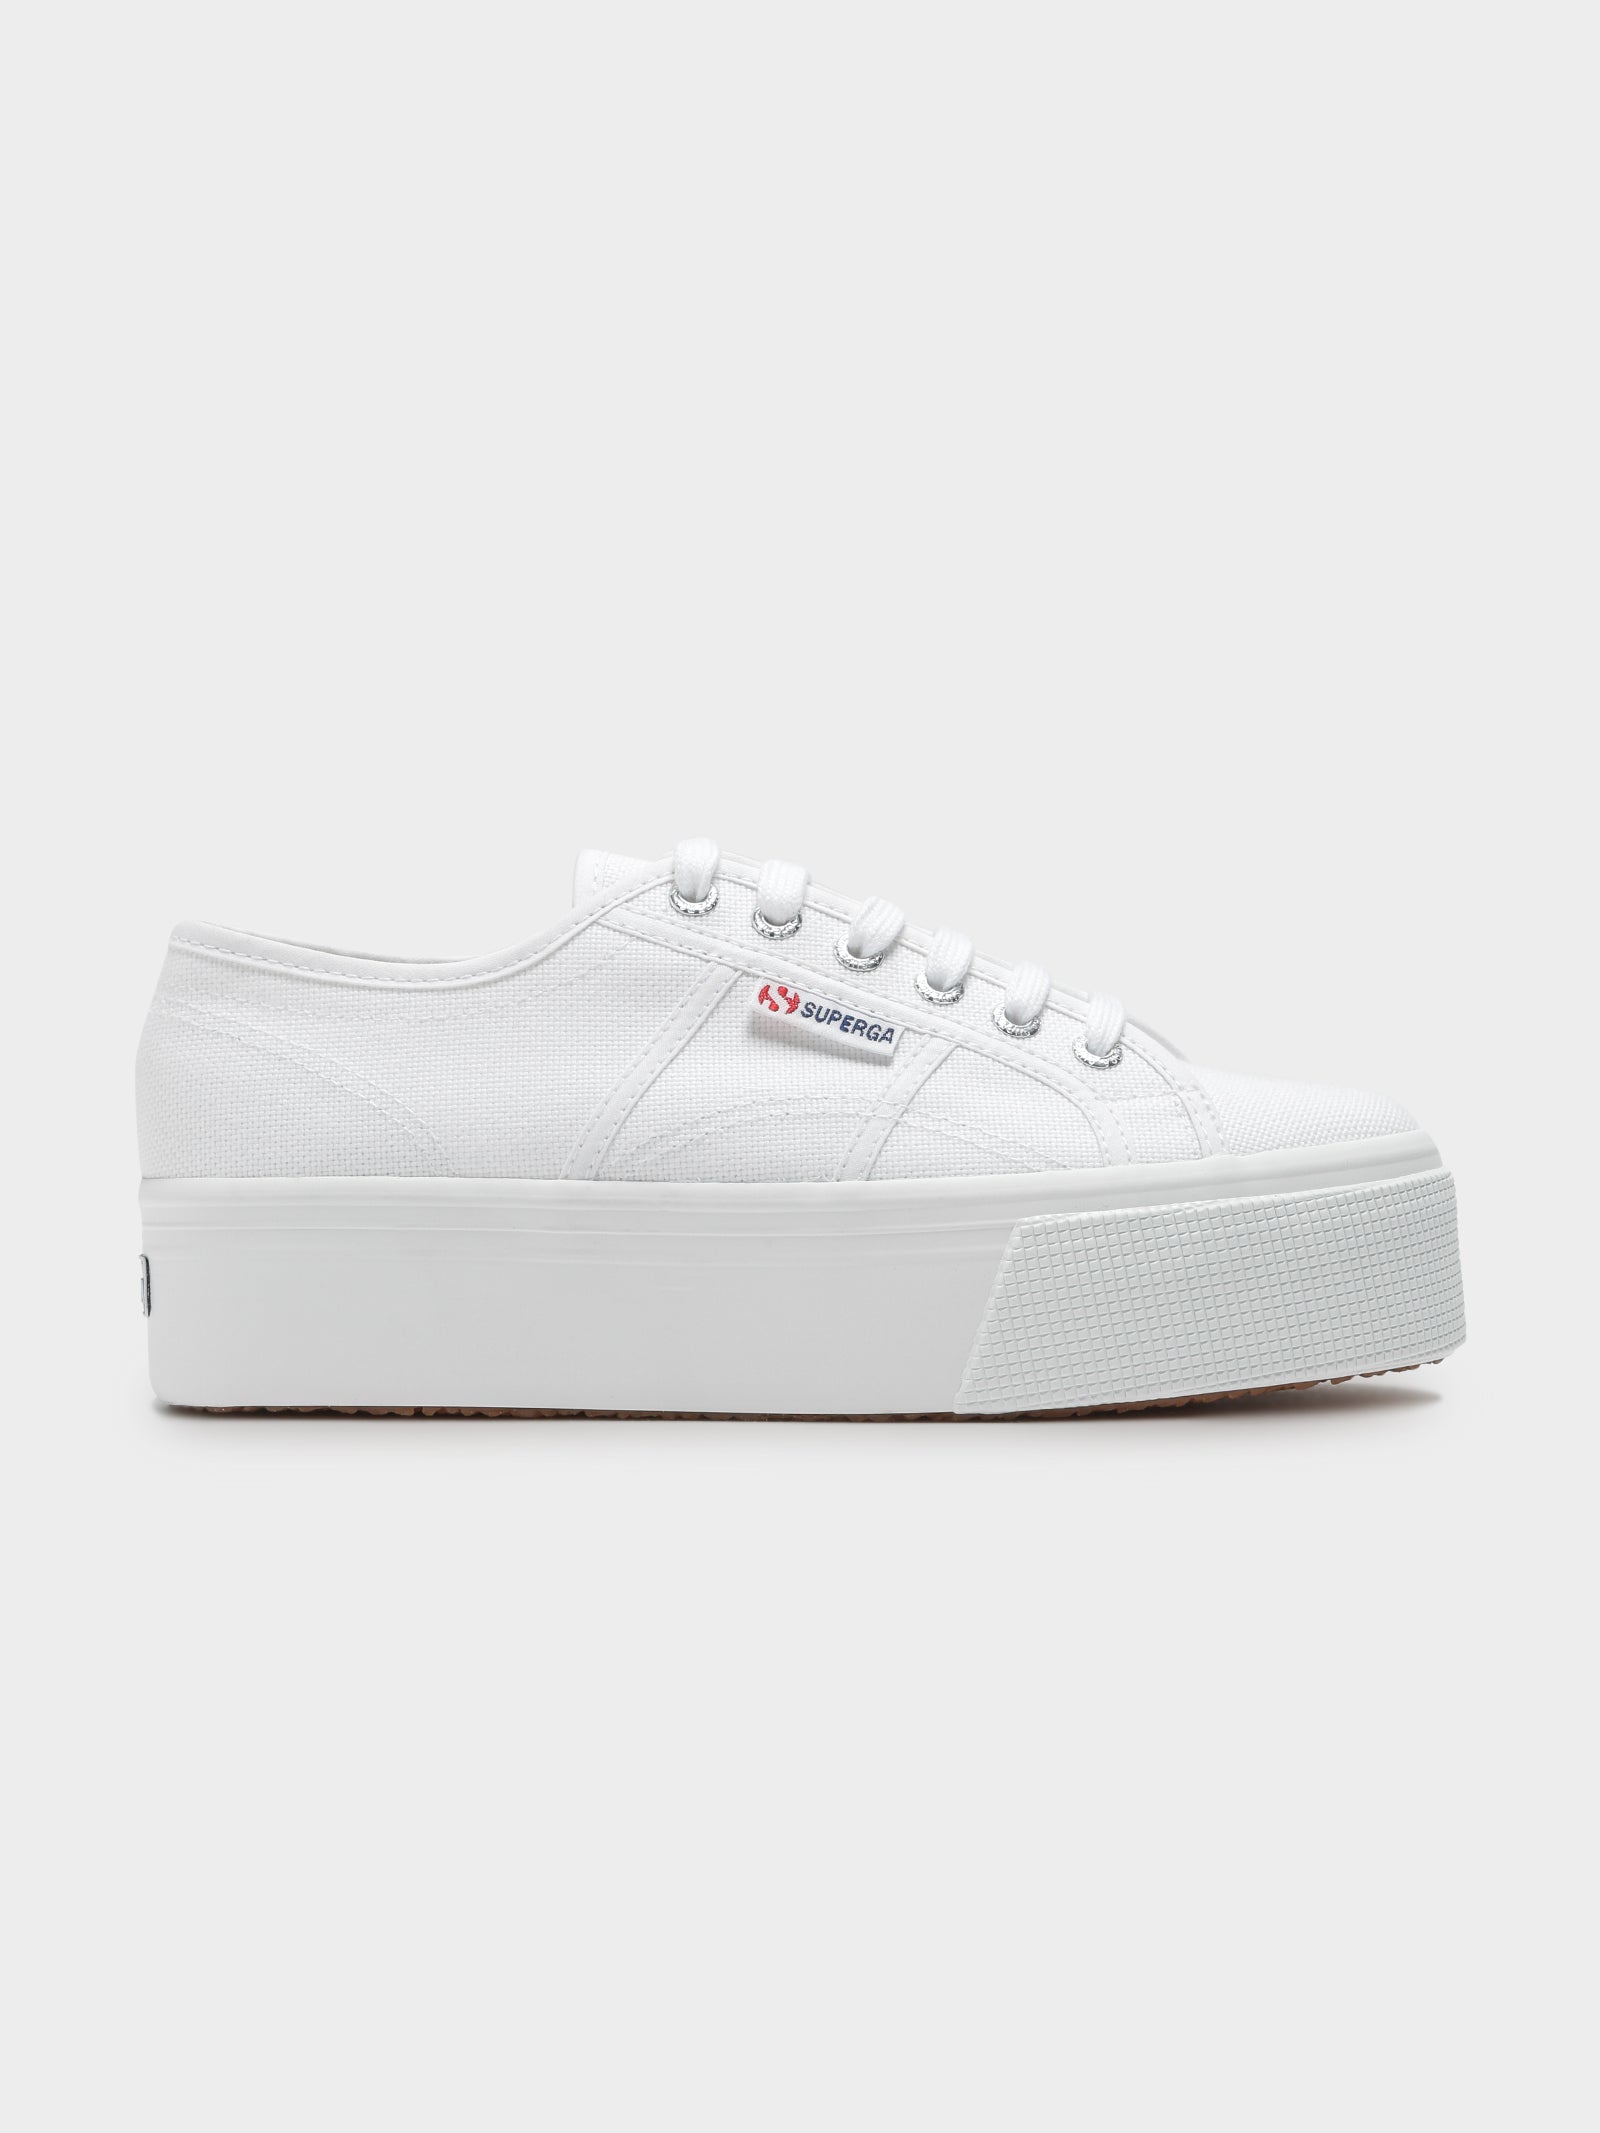 Triple Up White Leather Platform Sneakers | White sneakers women, White  platform sneakers, Platform sneakers outfit